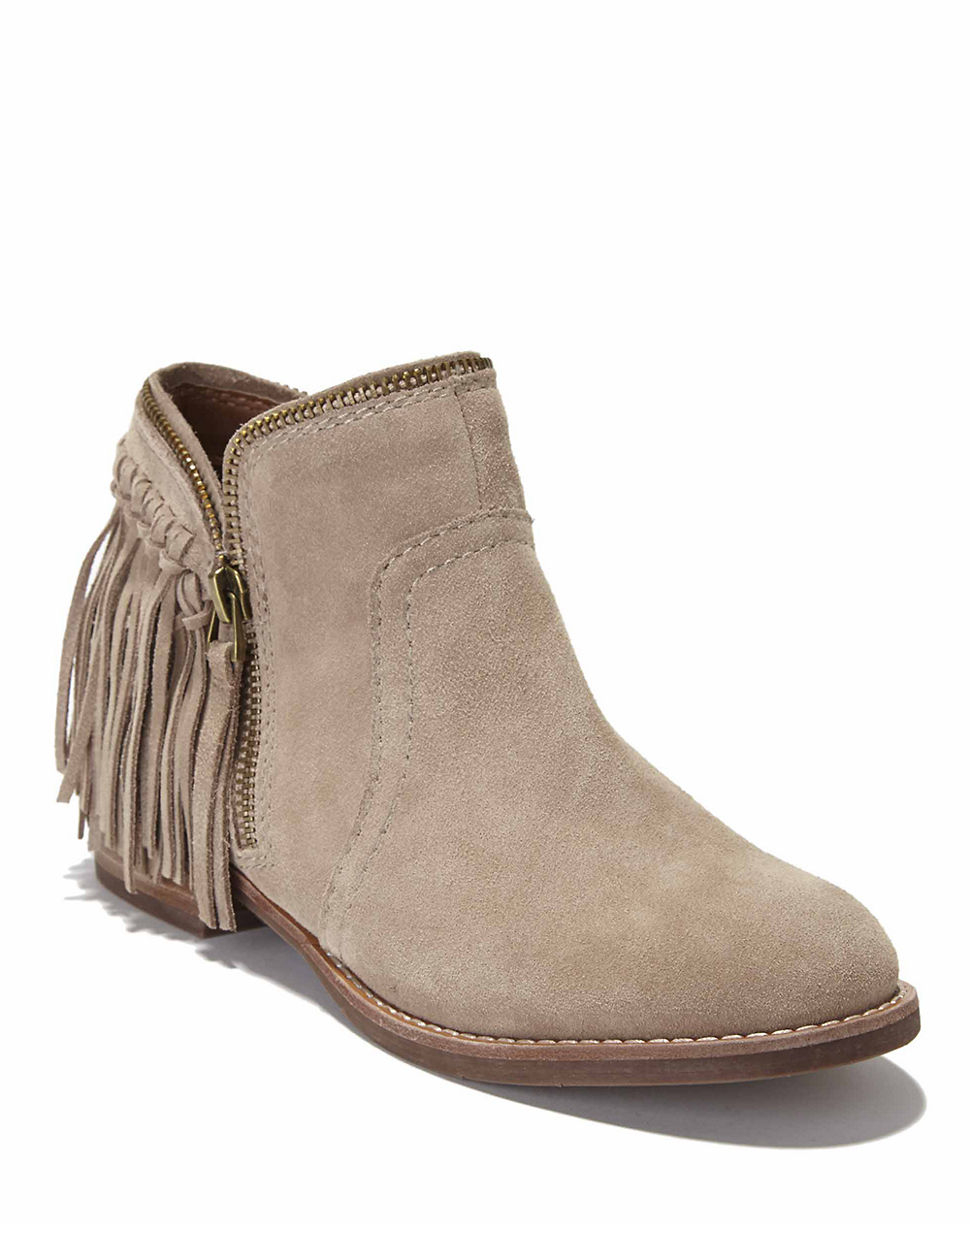 Dv By Dolce Vita Fisher Suede Ankle Boots in Beige (NUDE 